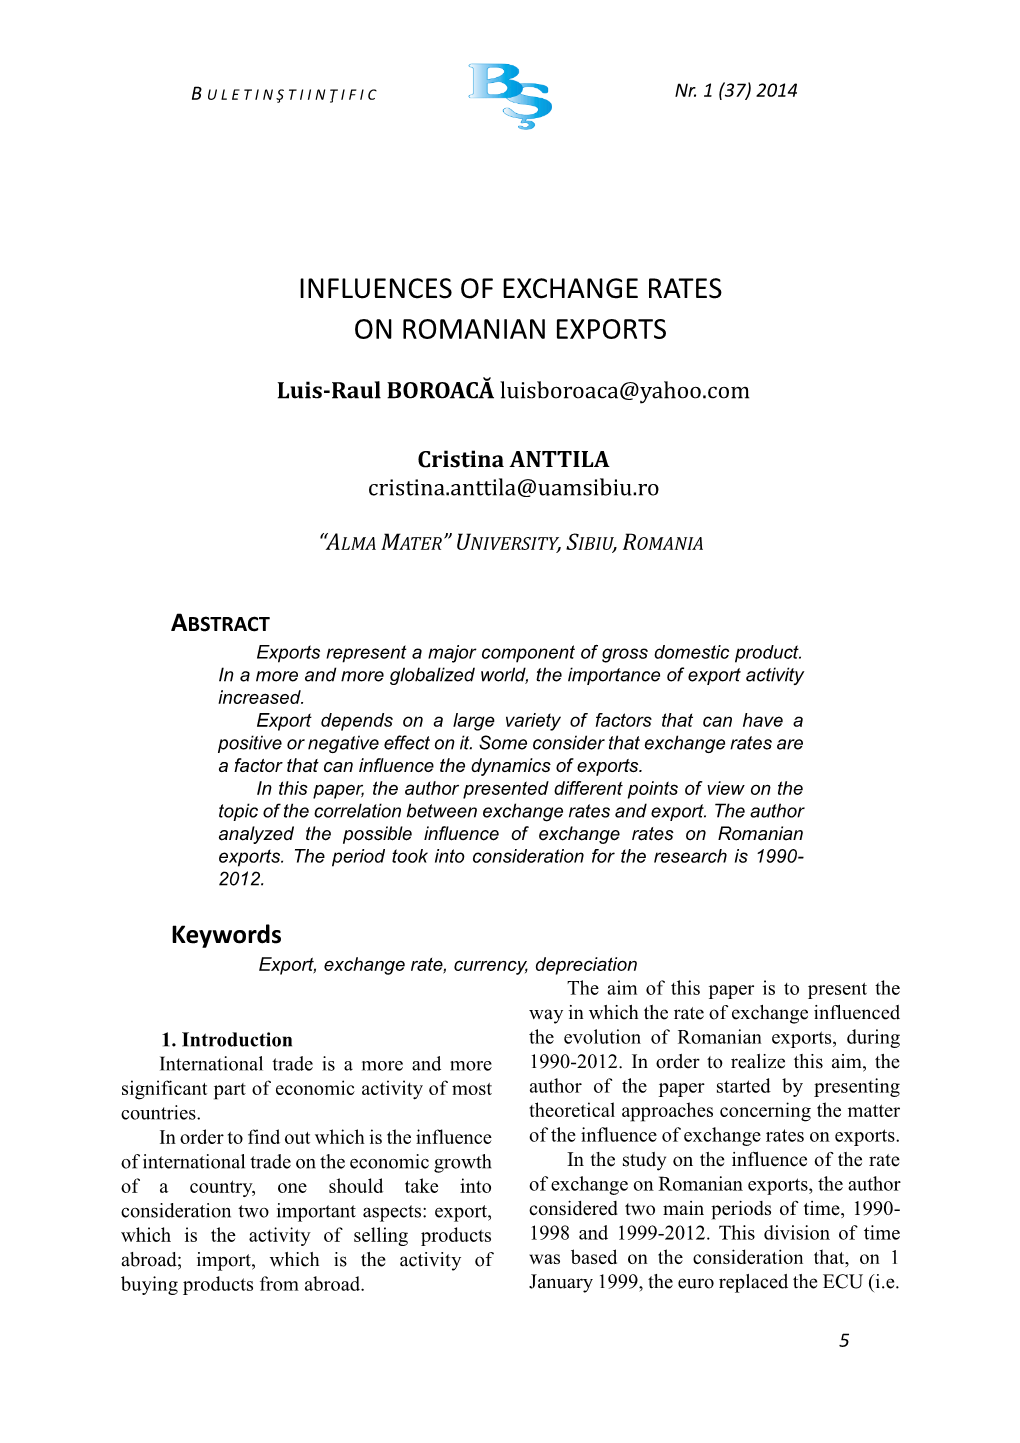 Influences of Exchange Rates on Romanian Exports